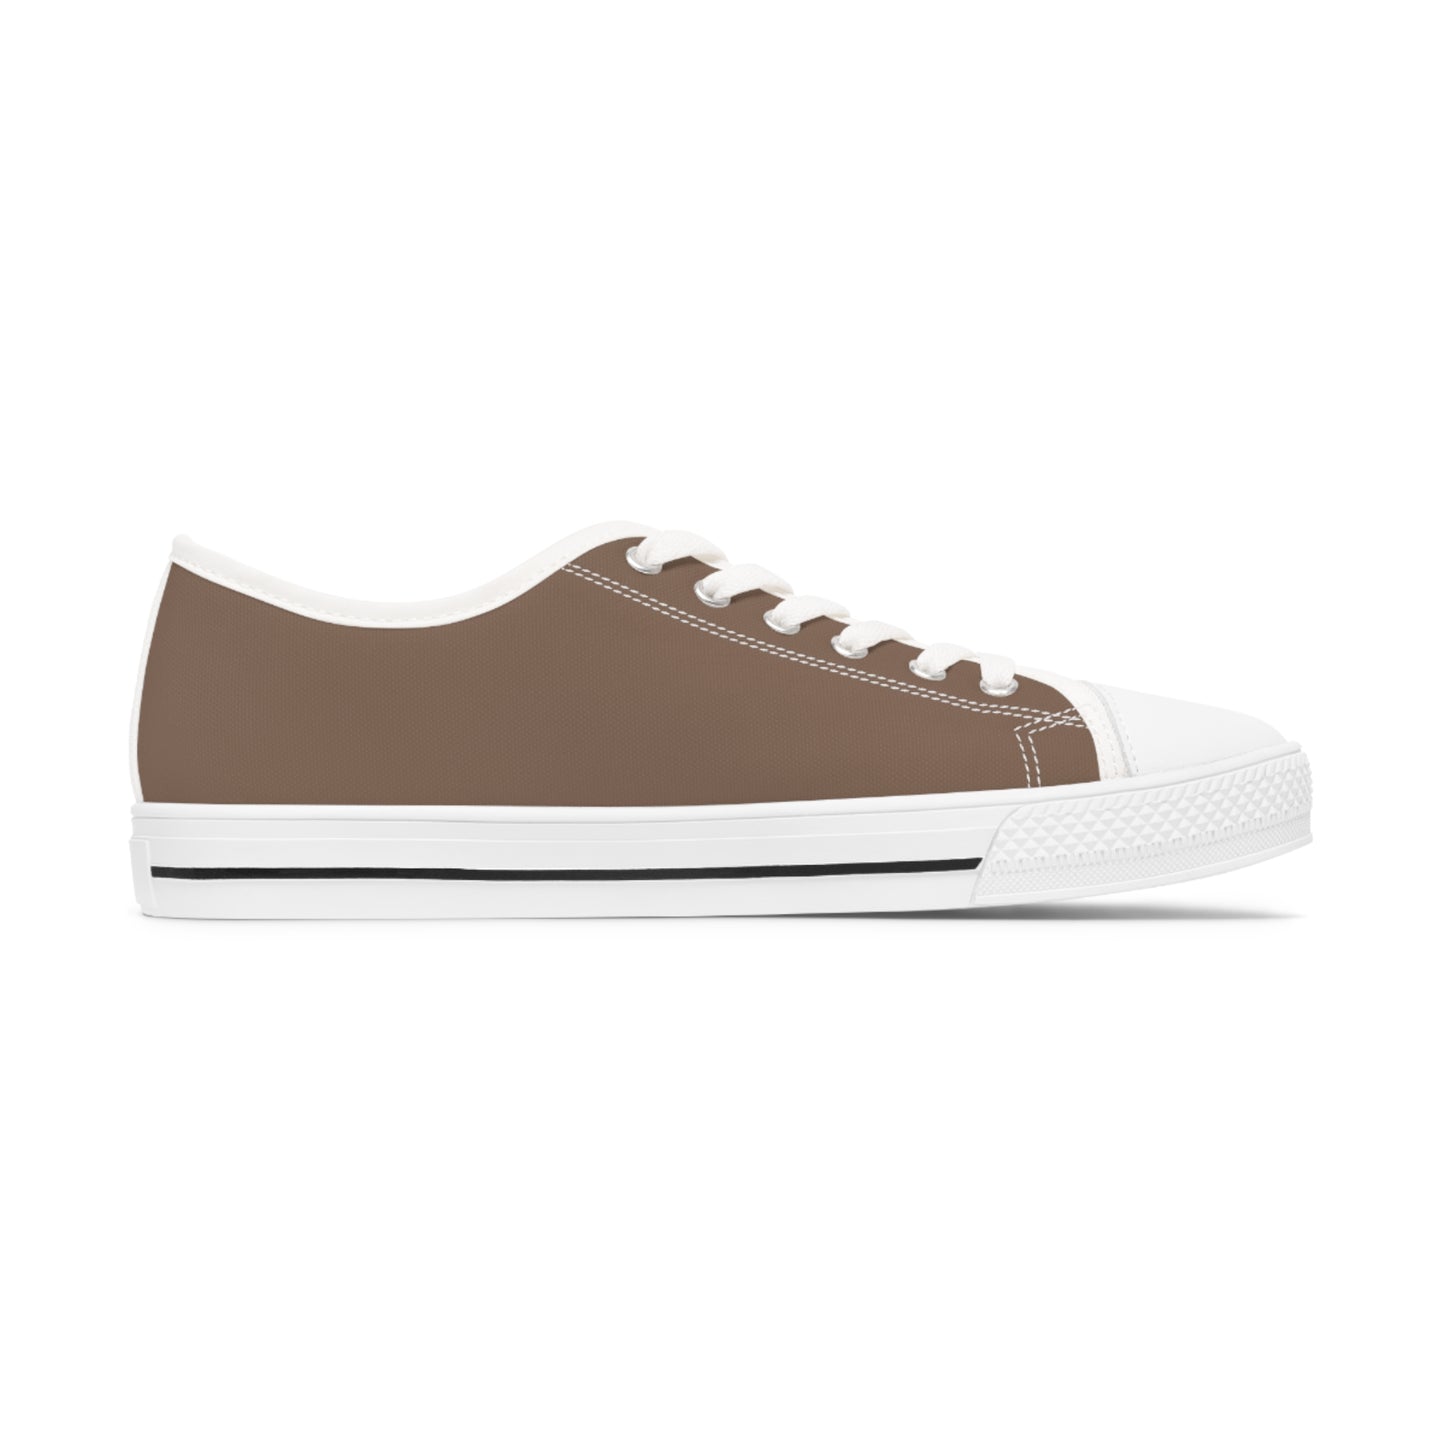 Women's Canvas Low Top Solid Color Sneakers - Latte Tan US 12 White sole